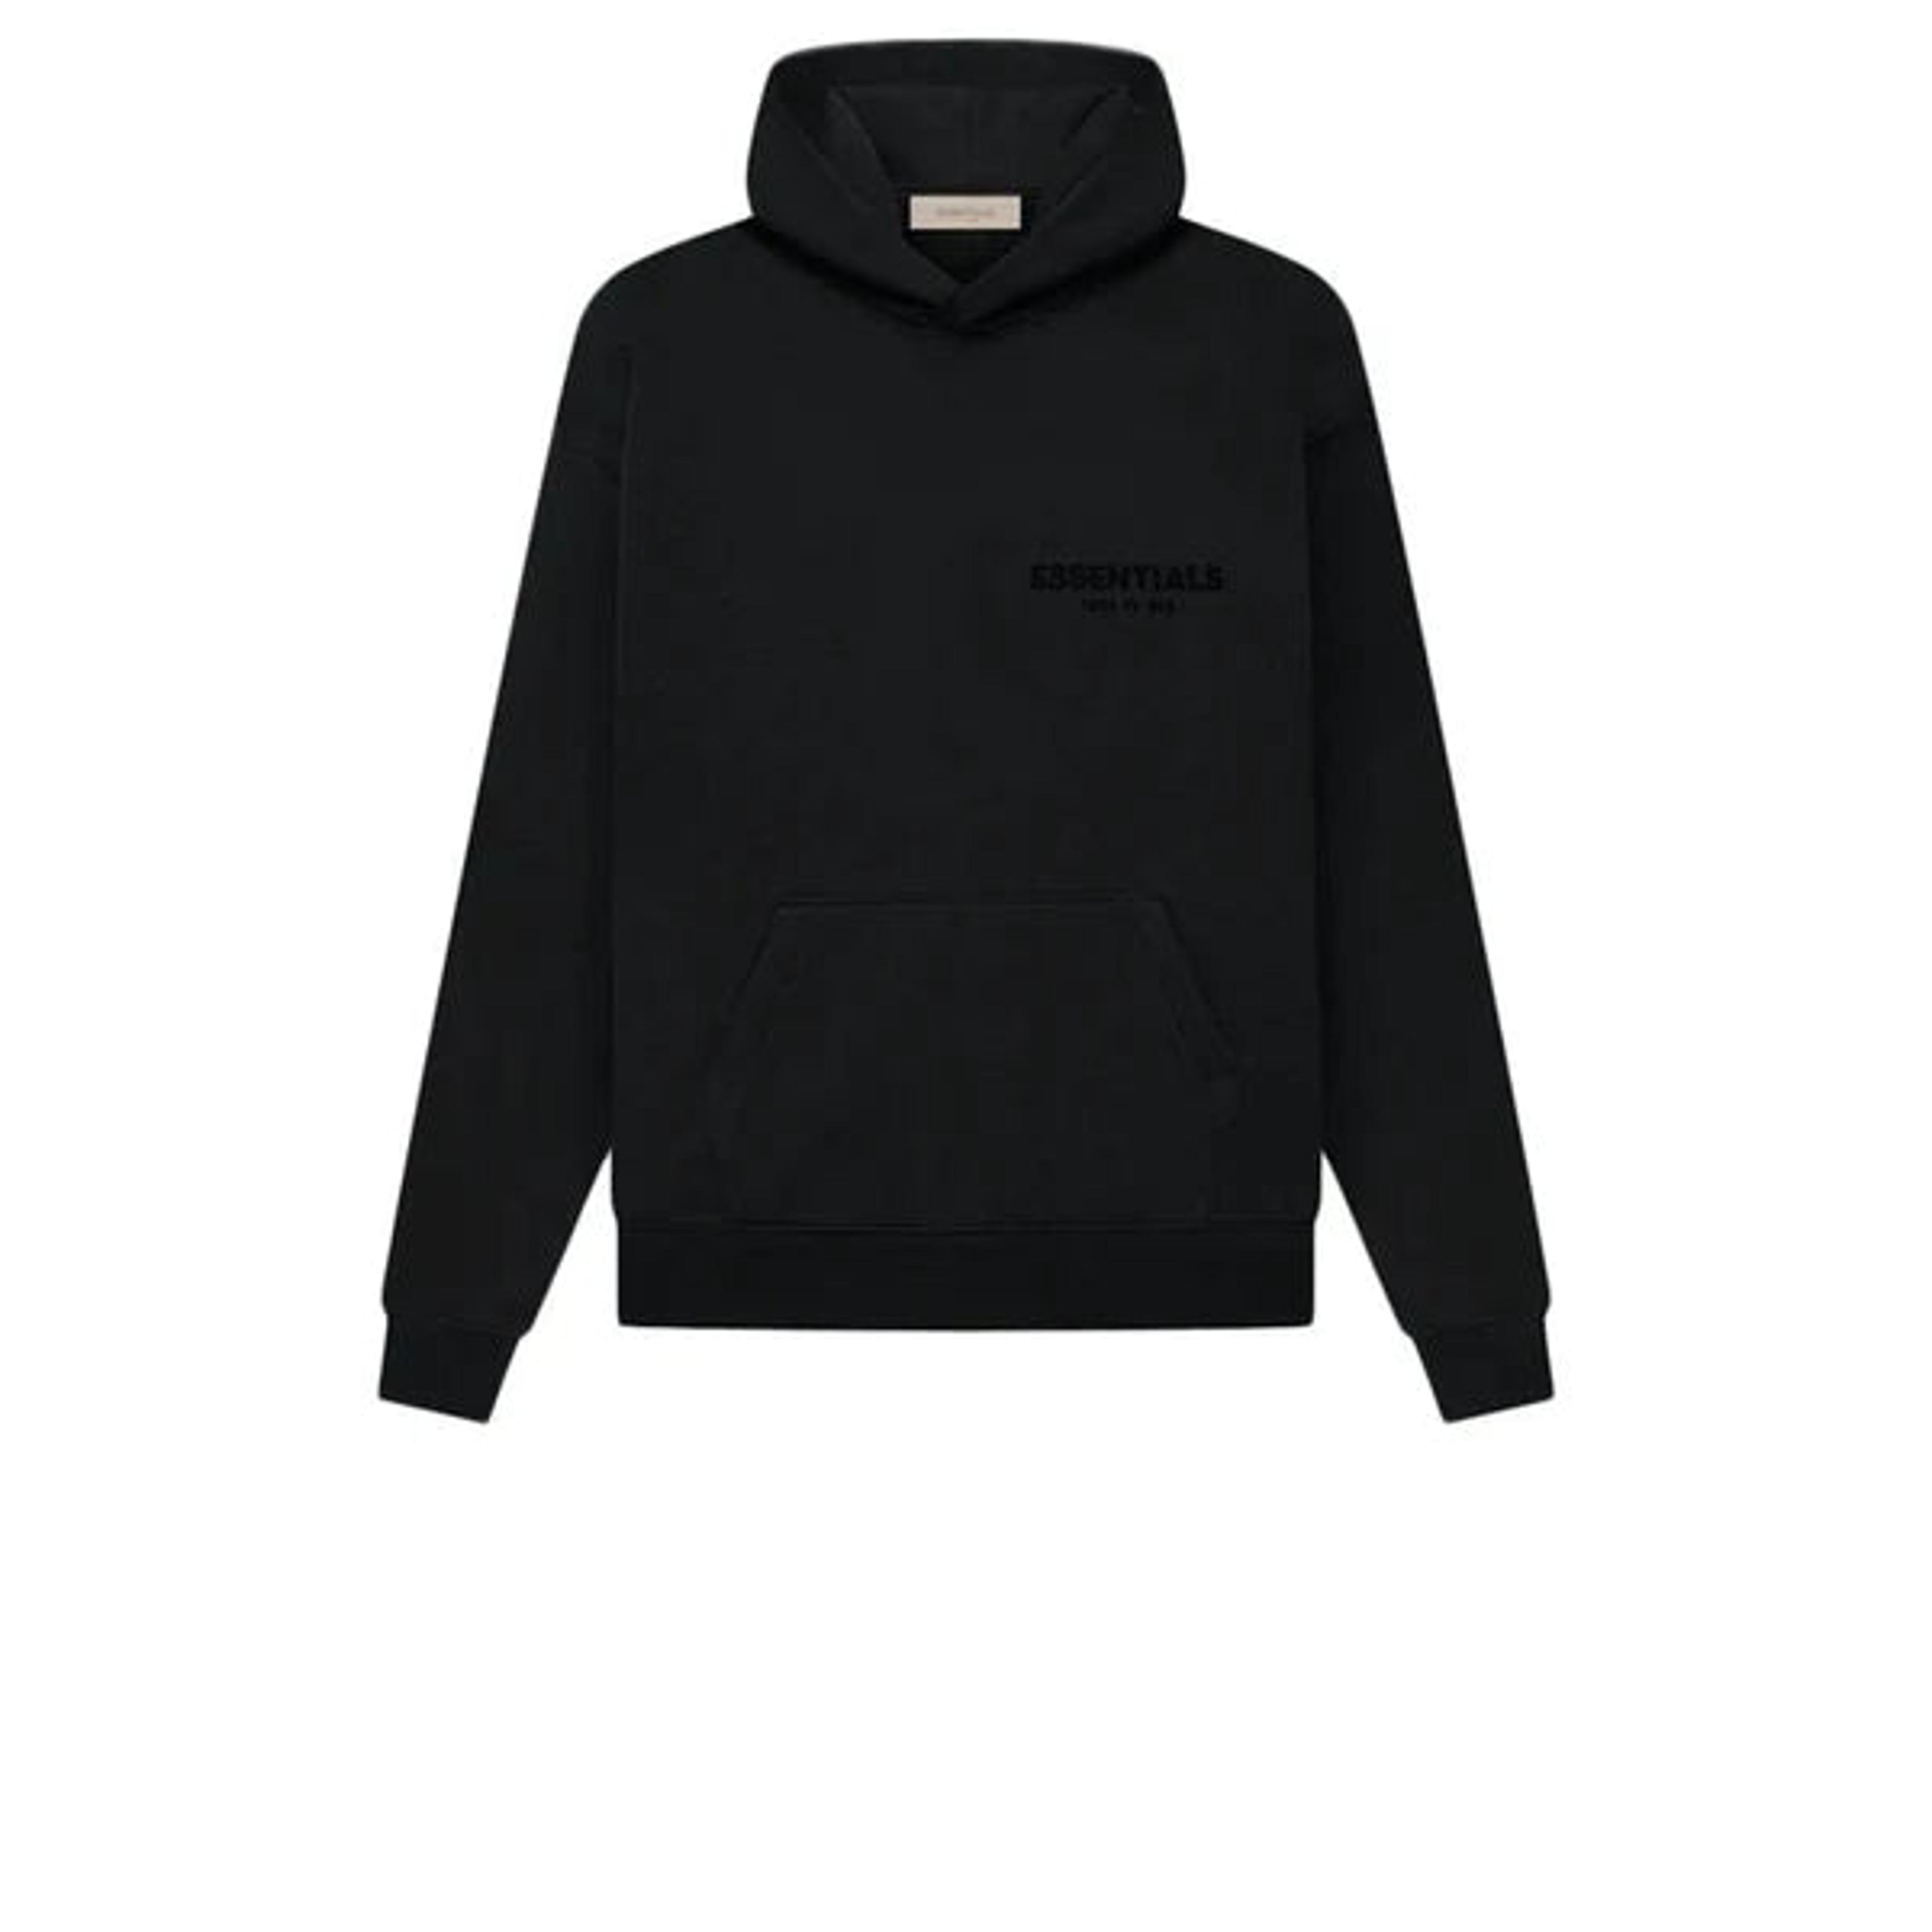 Fear of God Essentials ‘Limo Black’ Hoodie